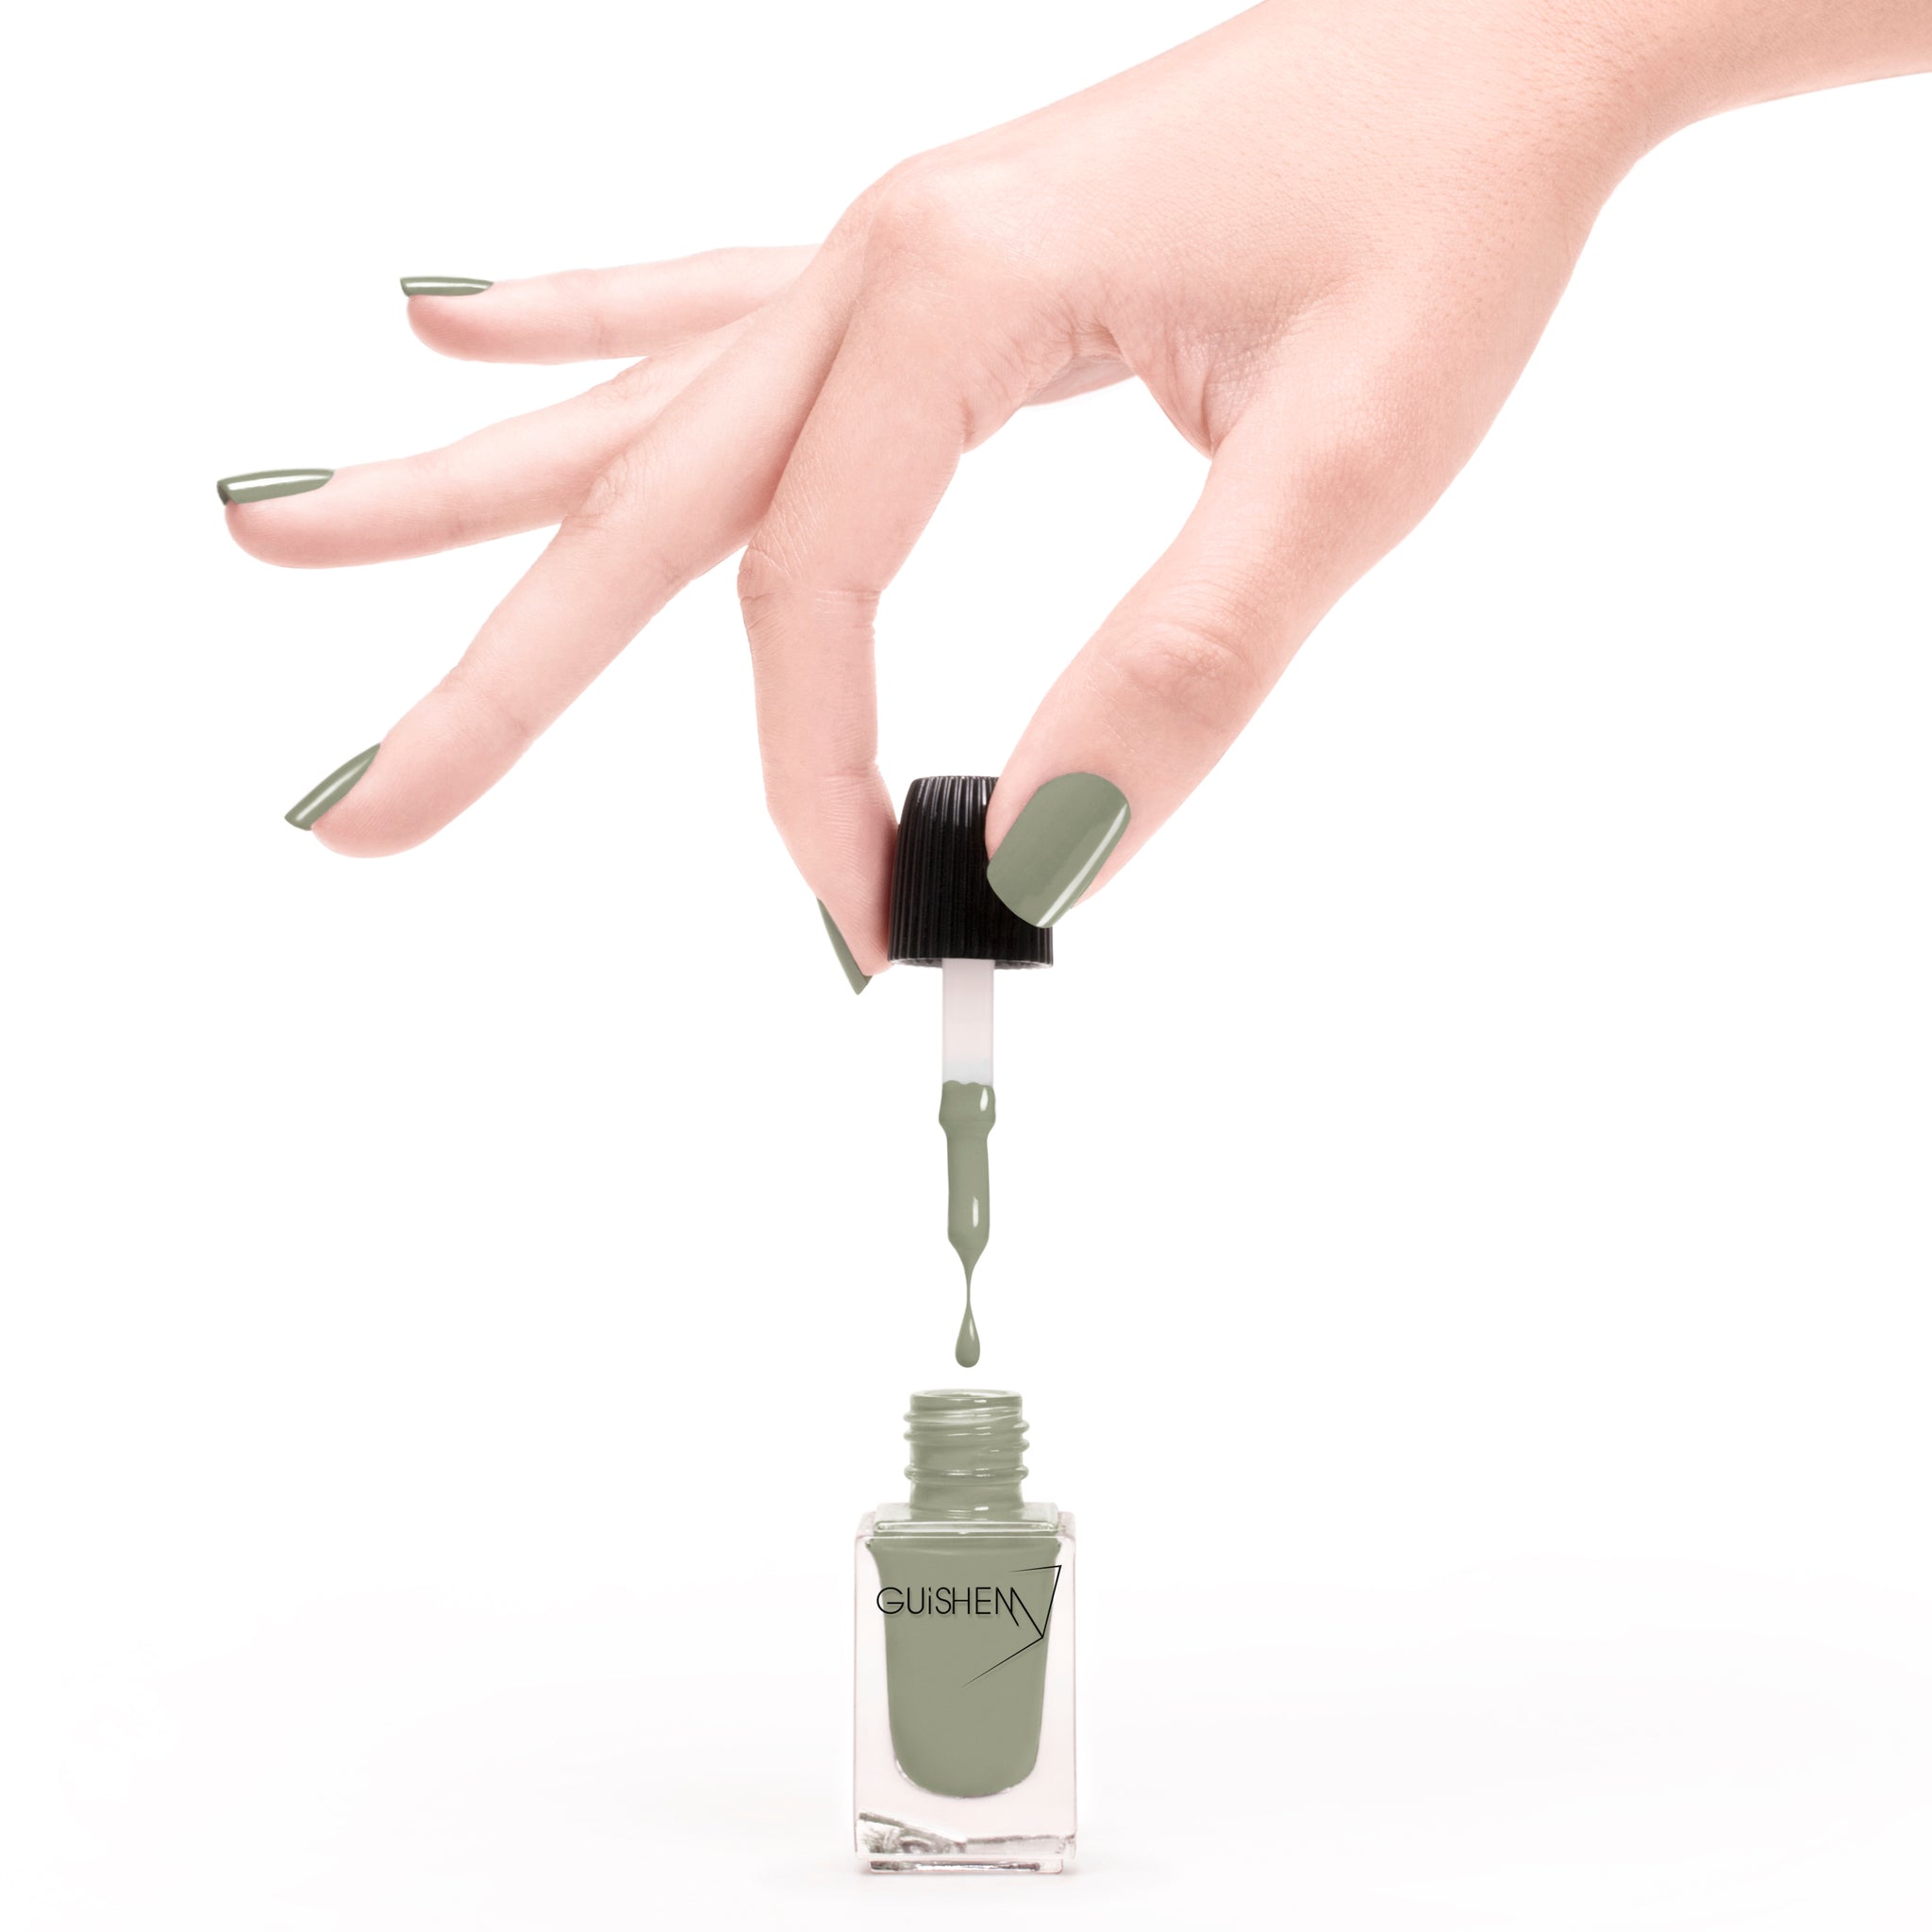 GUiSHEM - LE VERNIS - DUSTY GREEN 180